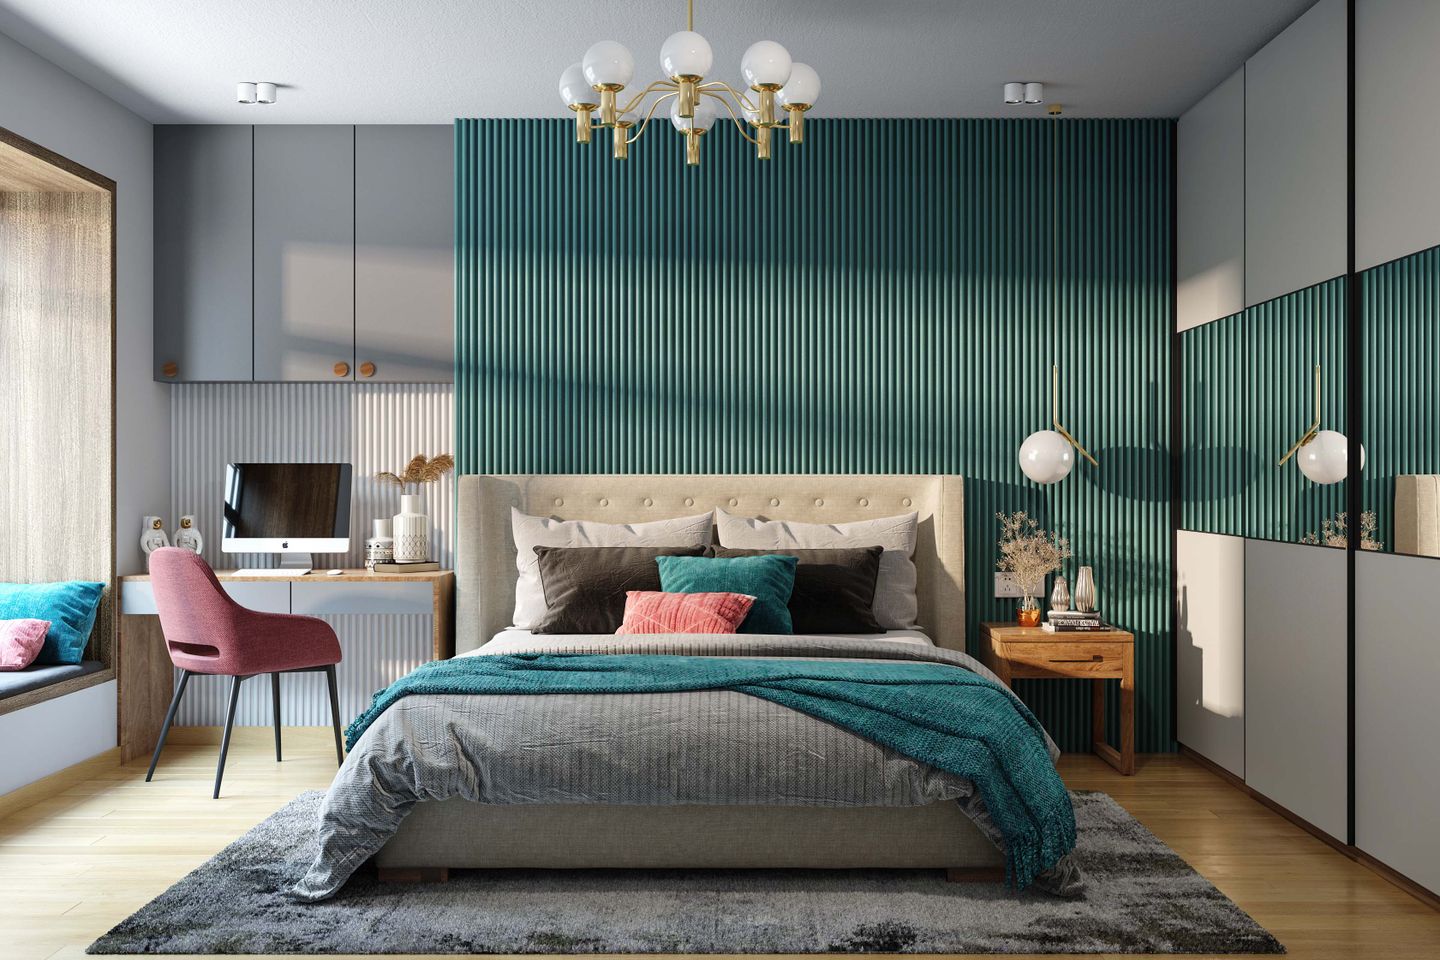 15x13 Ft  Master Bedroom Design With Teal Fluted Panelled Accent Wall - Livspace